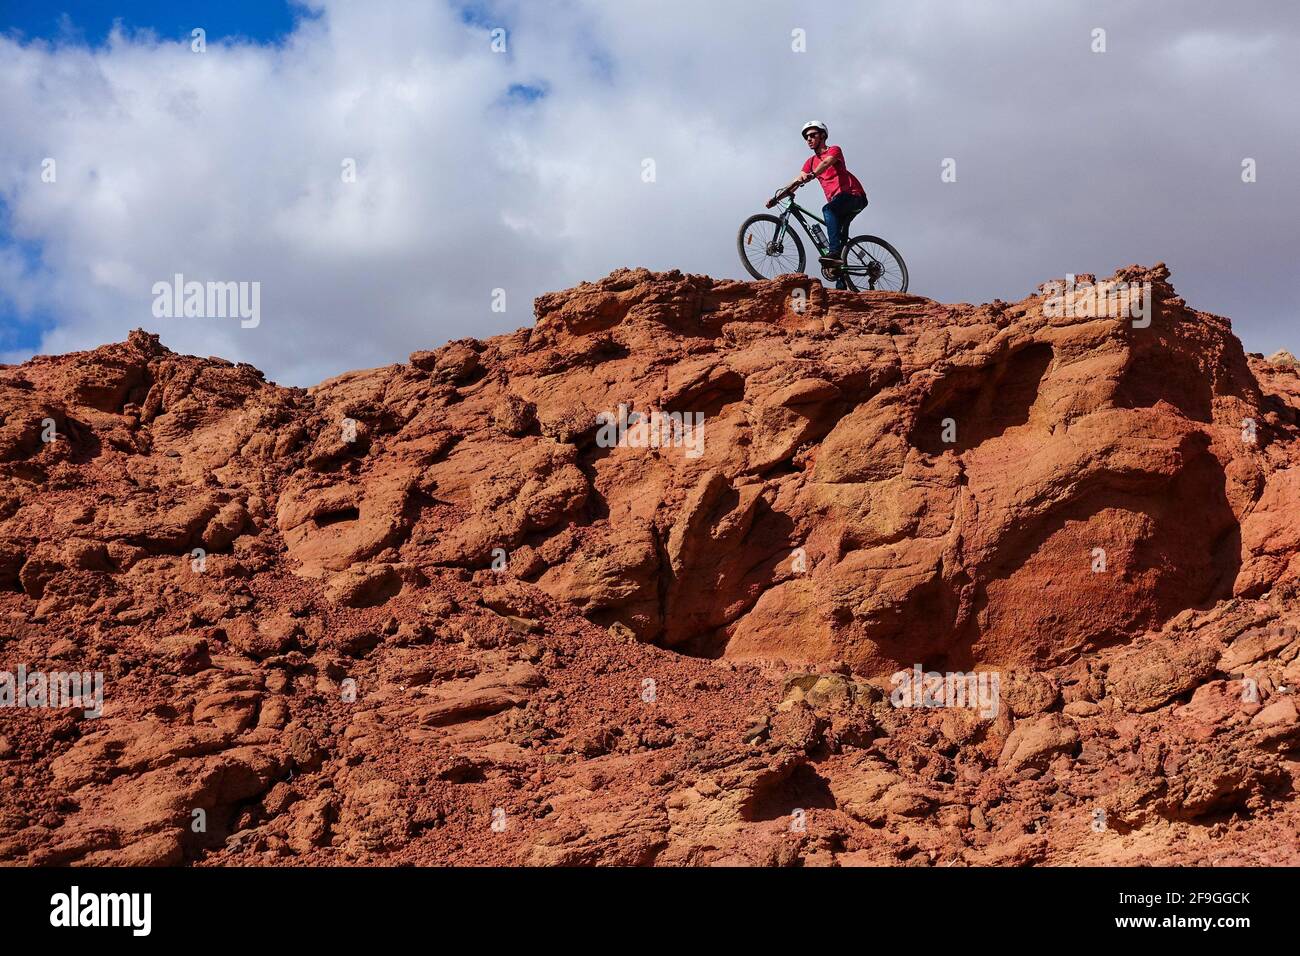 Extreme downhill biker on the edge of red rocks in Timna Park, Eilat, Israel Stock Photo